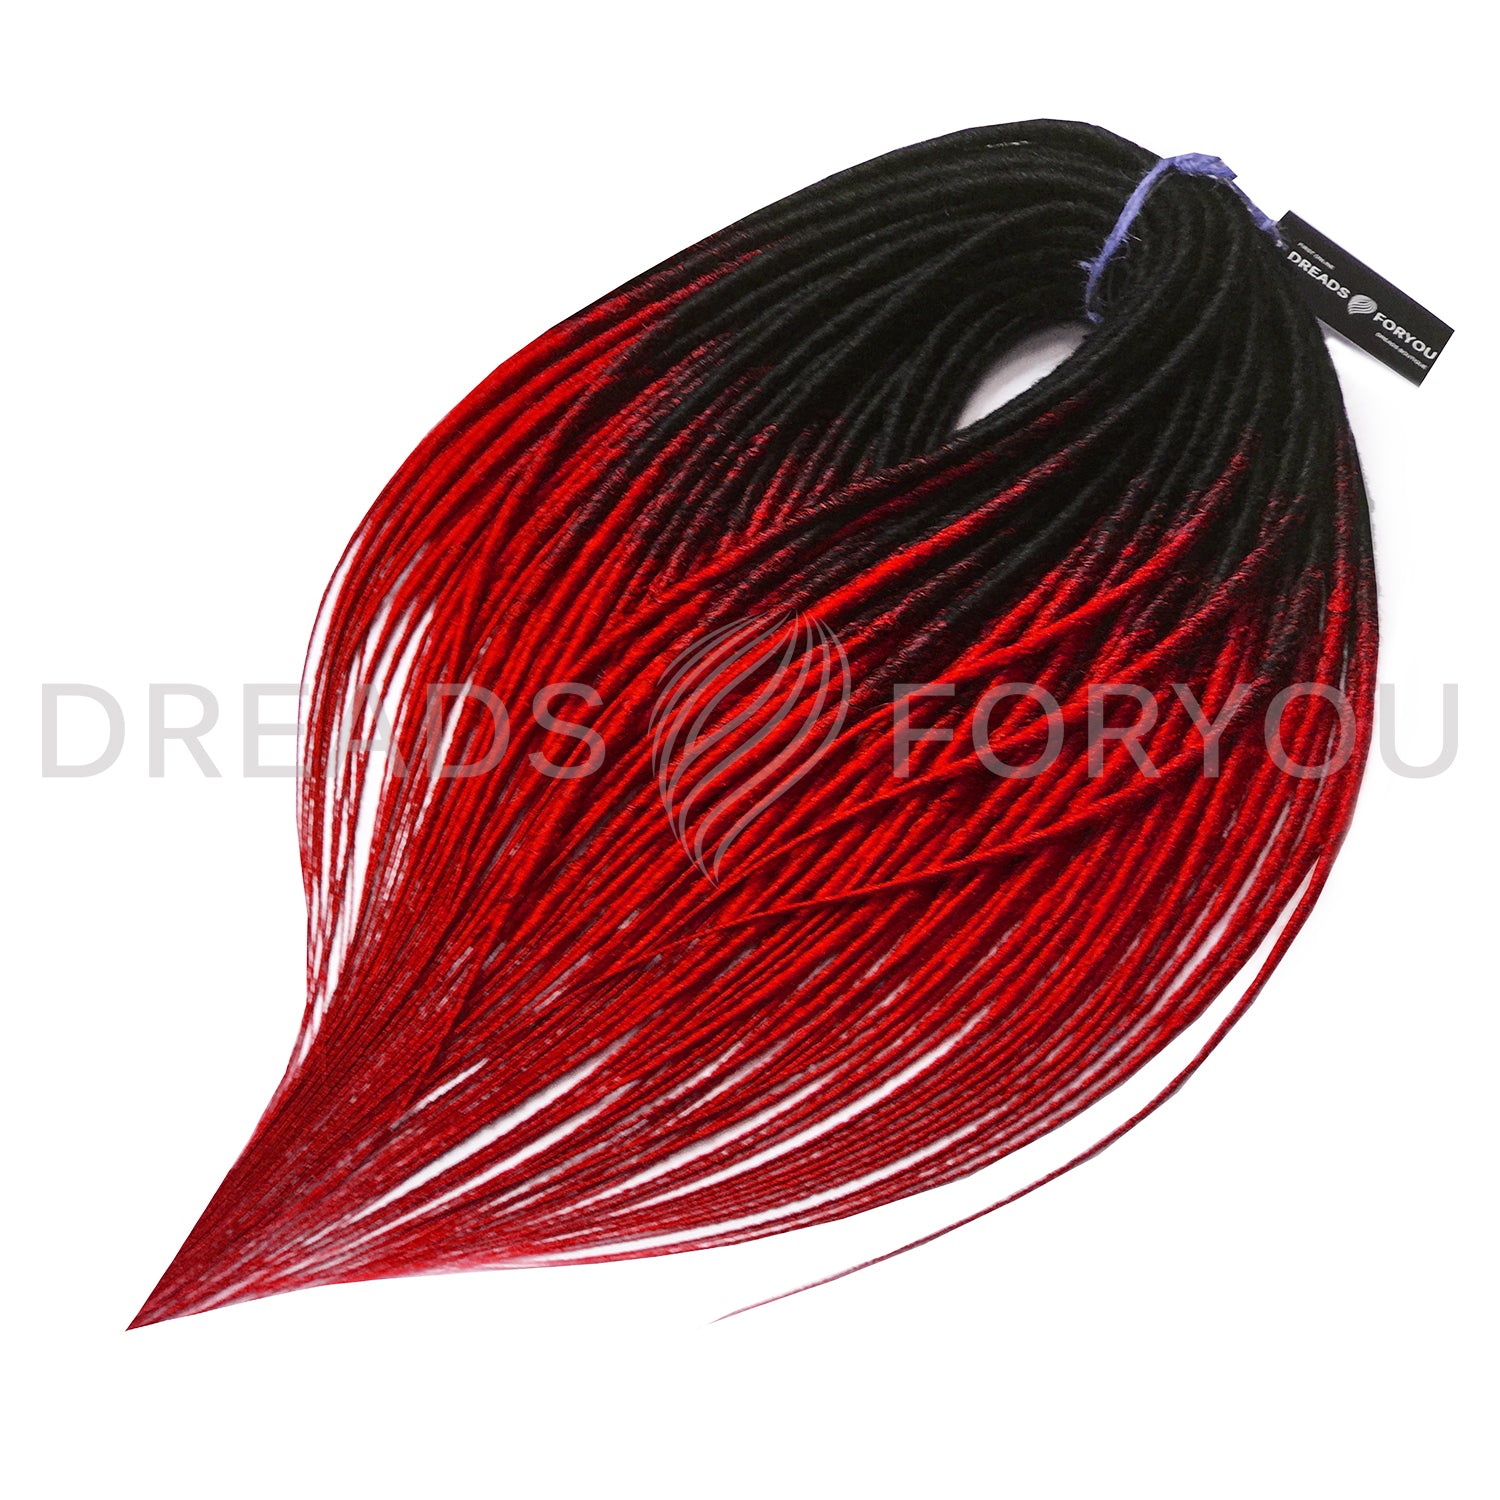 DE Smooth Classic Dreads Black/Red